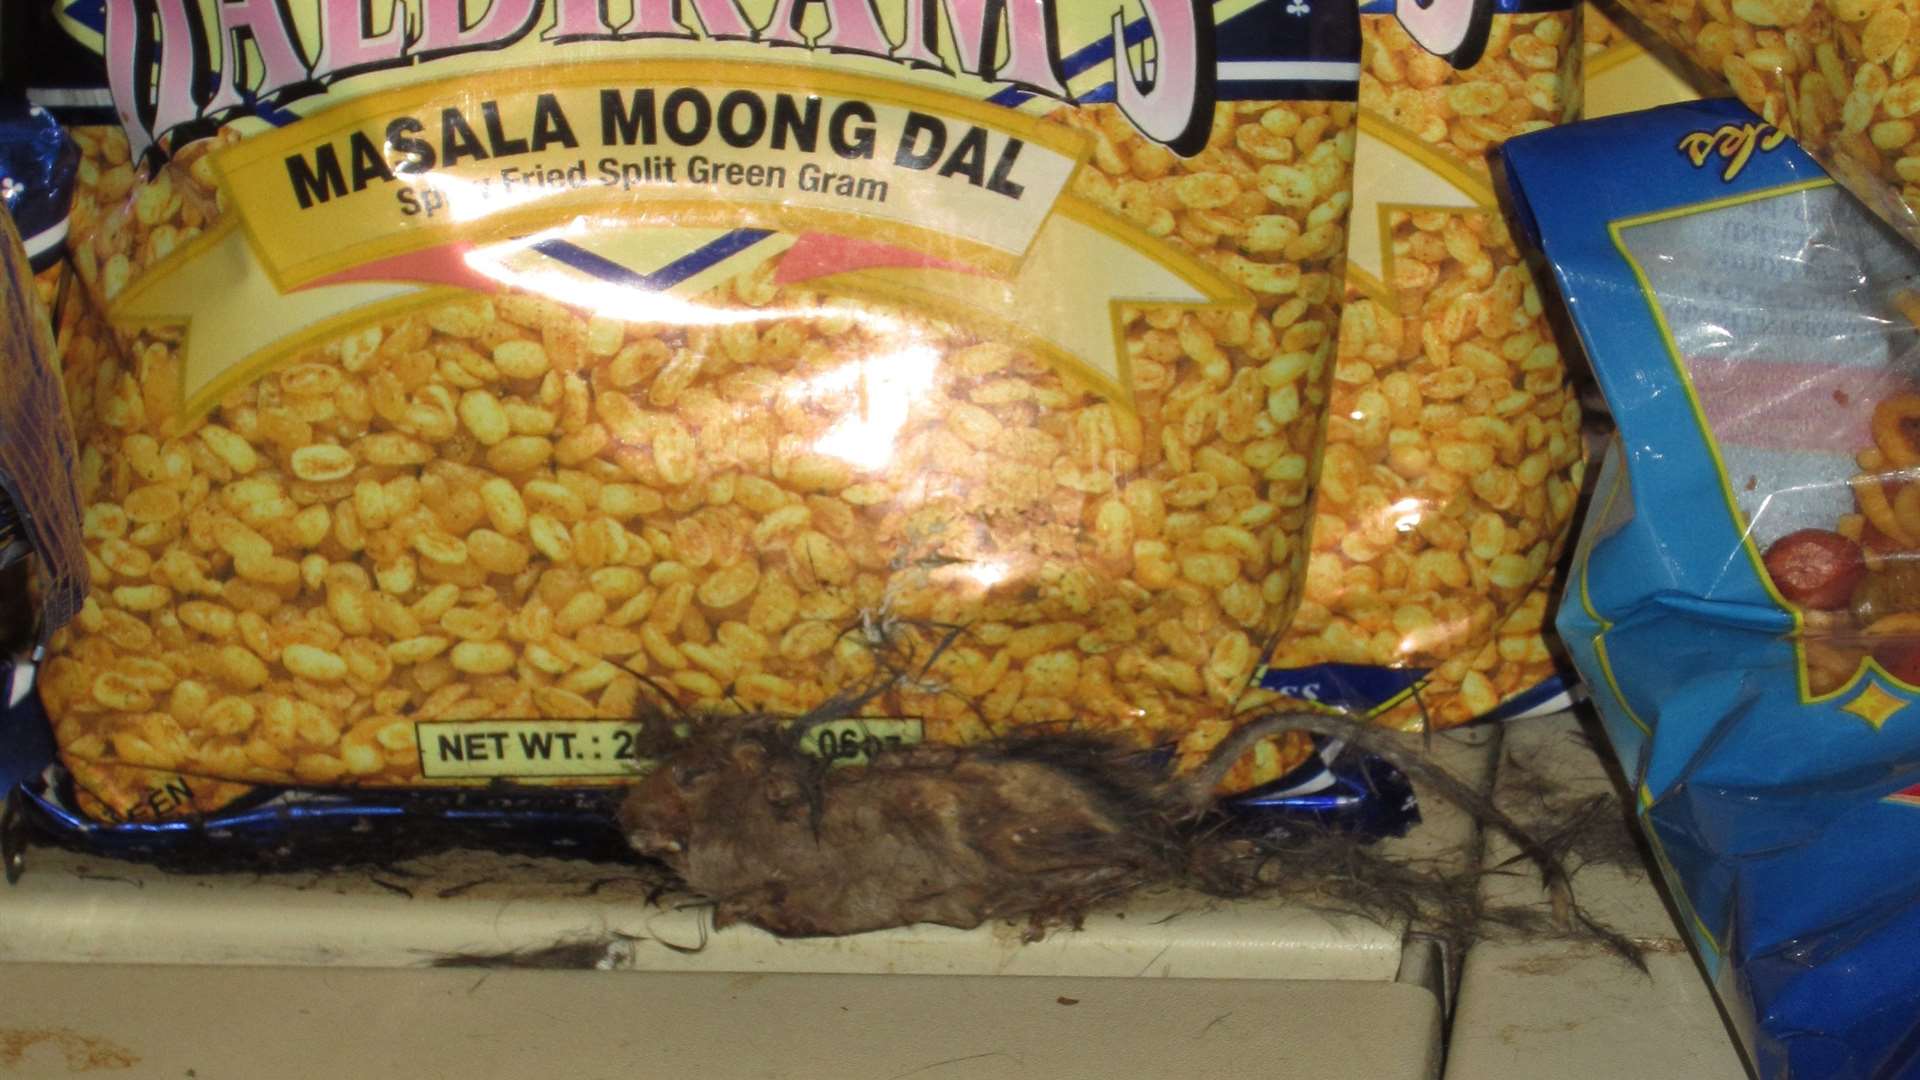 Rotting mouse corpse discovered in beans